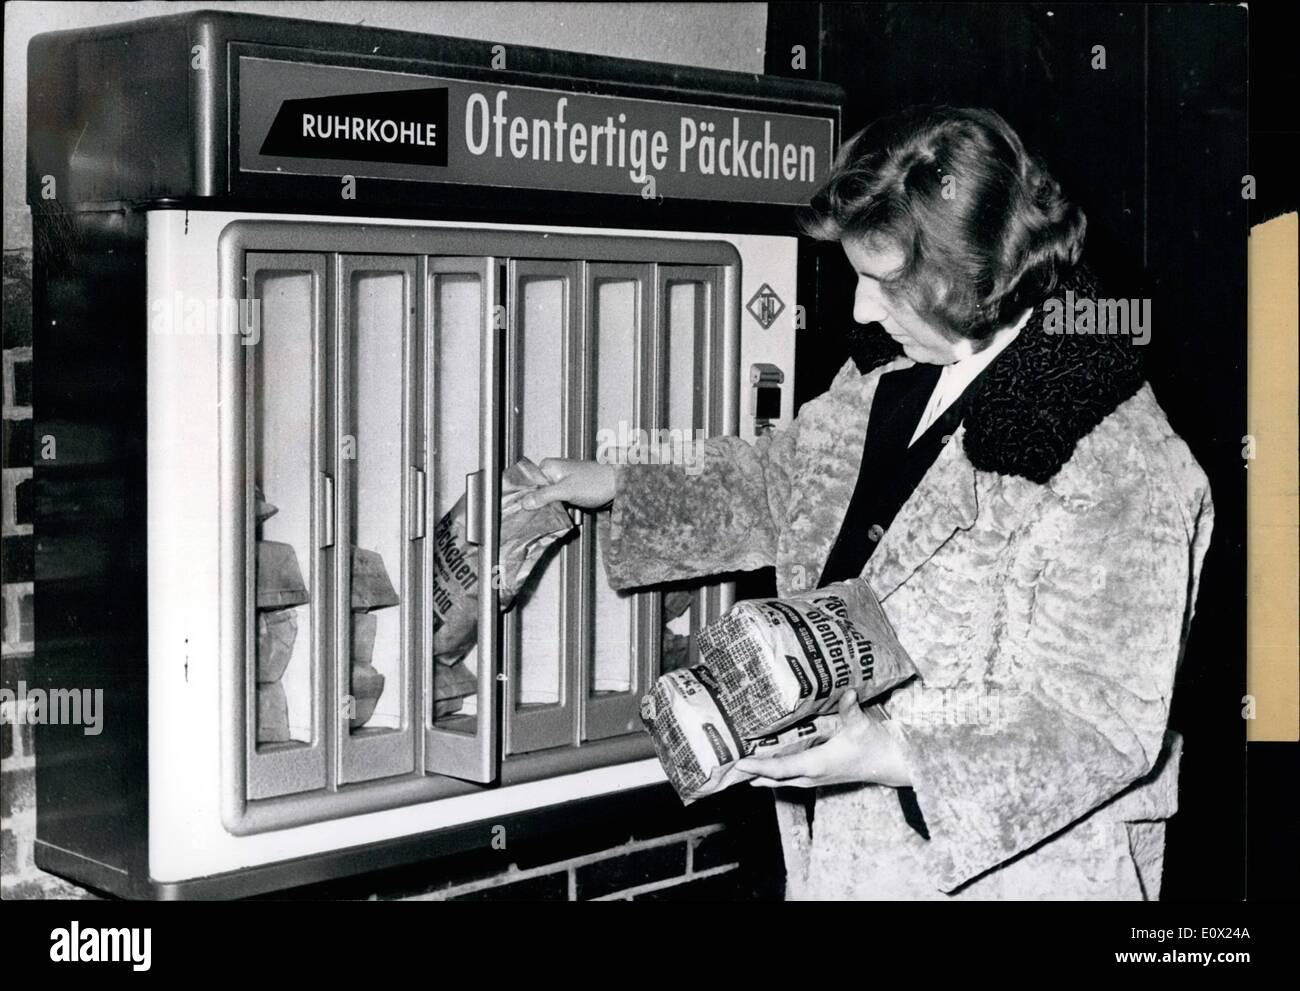 Nov. 11, 1964 - Coal for sale: Slot-machines have been set up in some german towns for the sale of coal in handy portion bags. Late housewives and lazy bachelors can shop there 24 hours a day to get a warm home if thex dont have a cellar or dont like to get dirty hands packing up heating material. Stock Photo